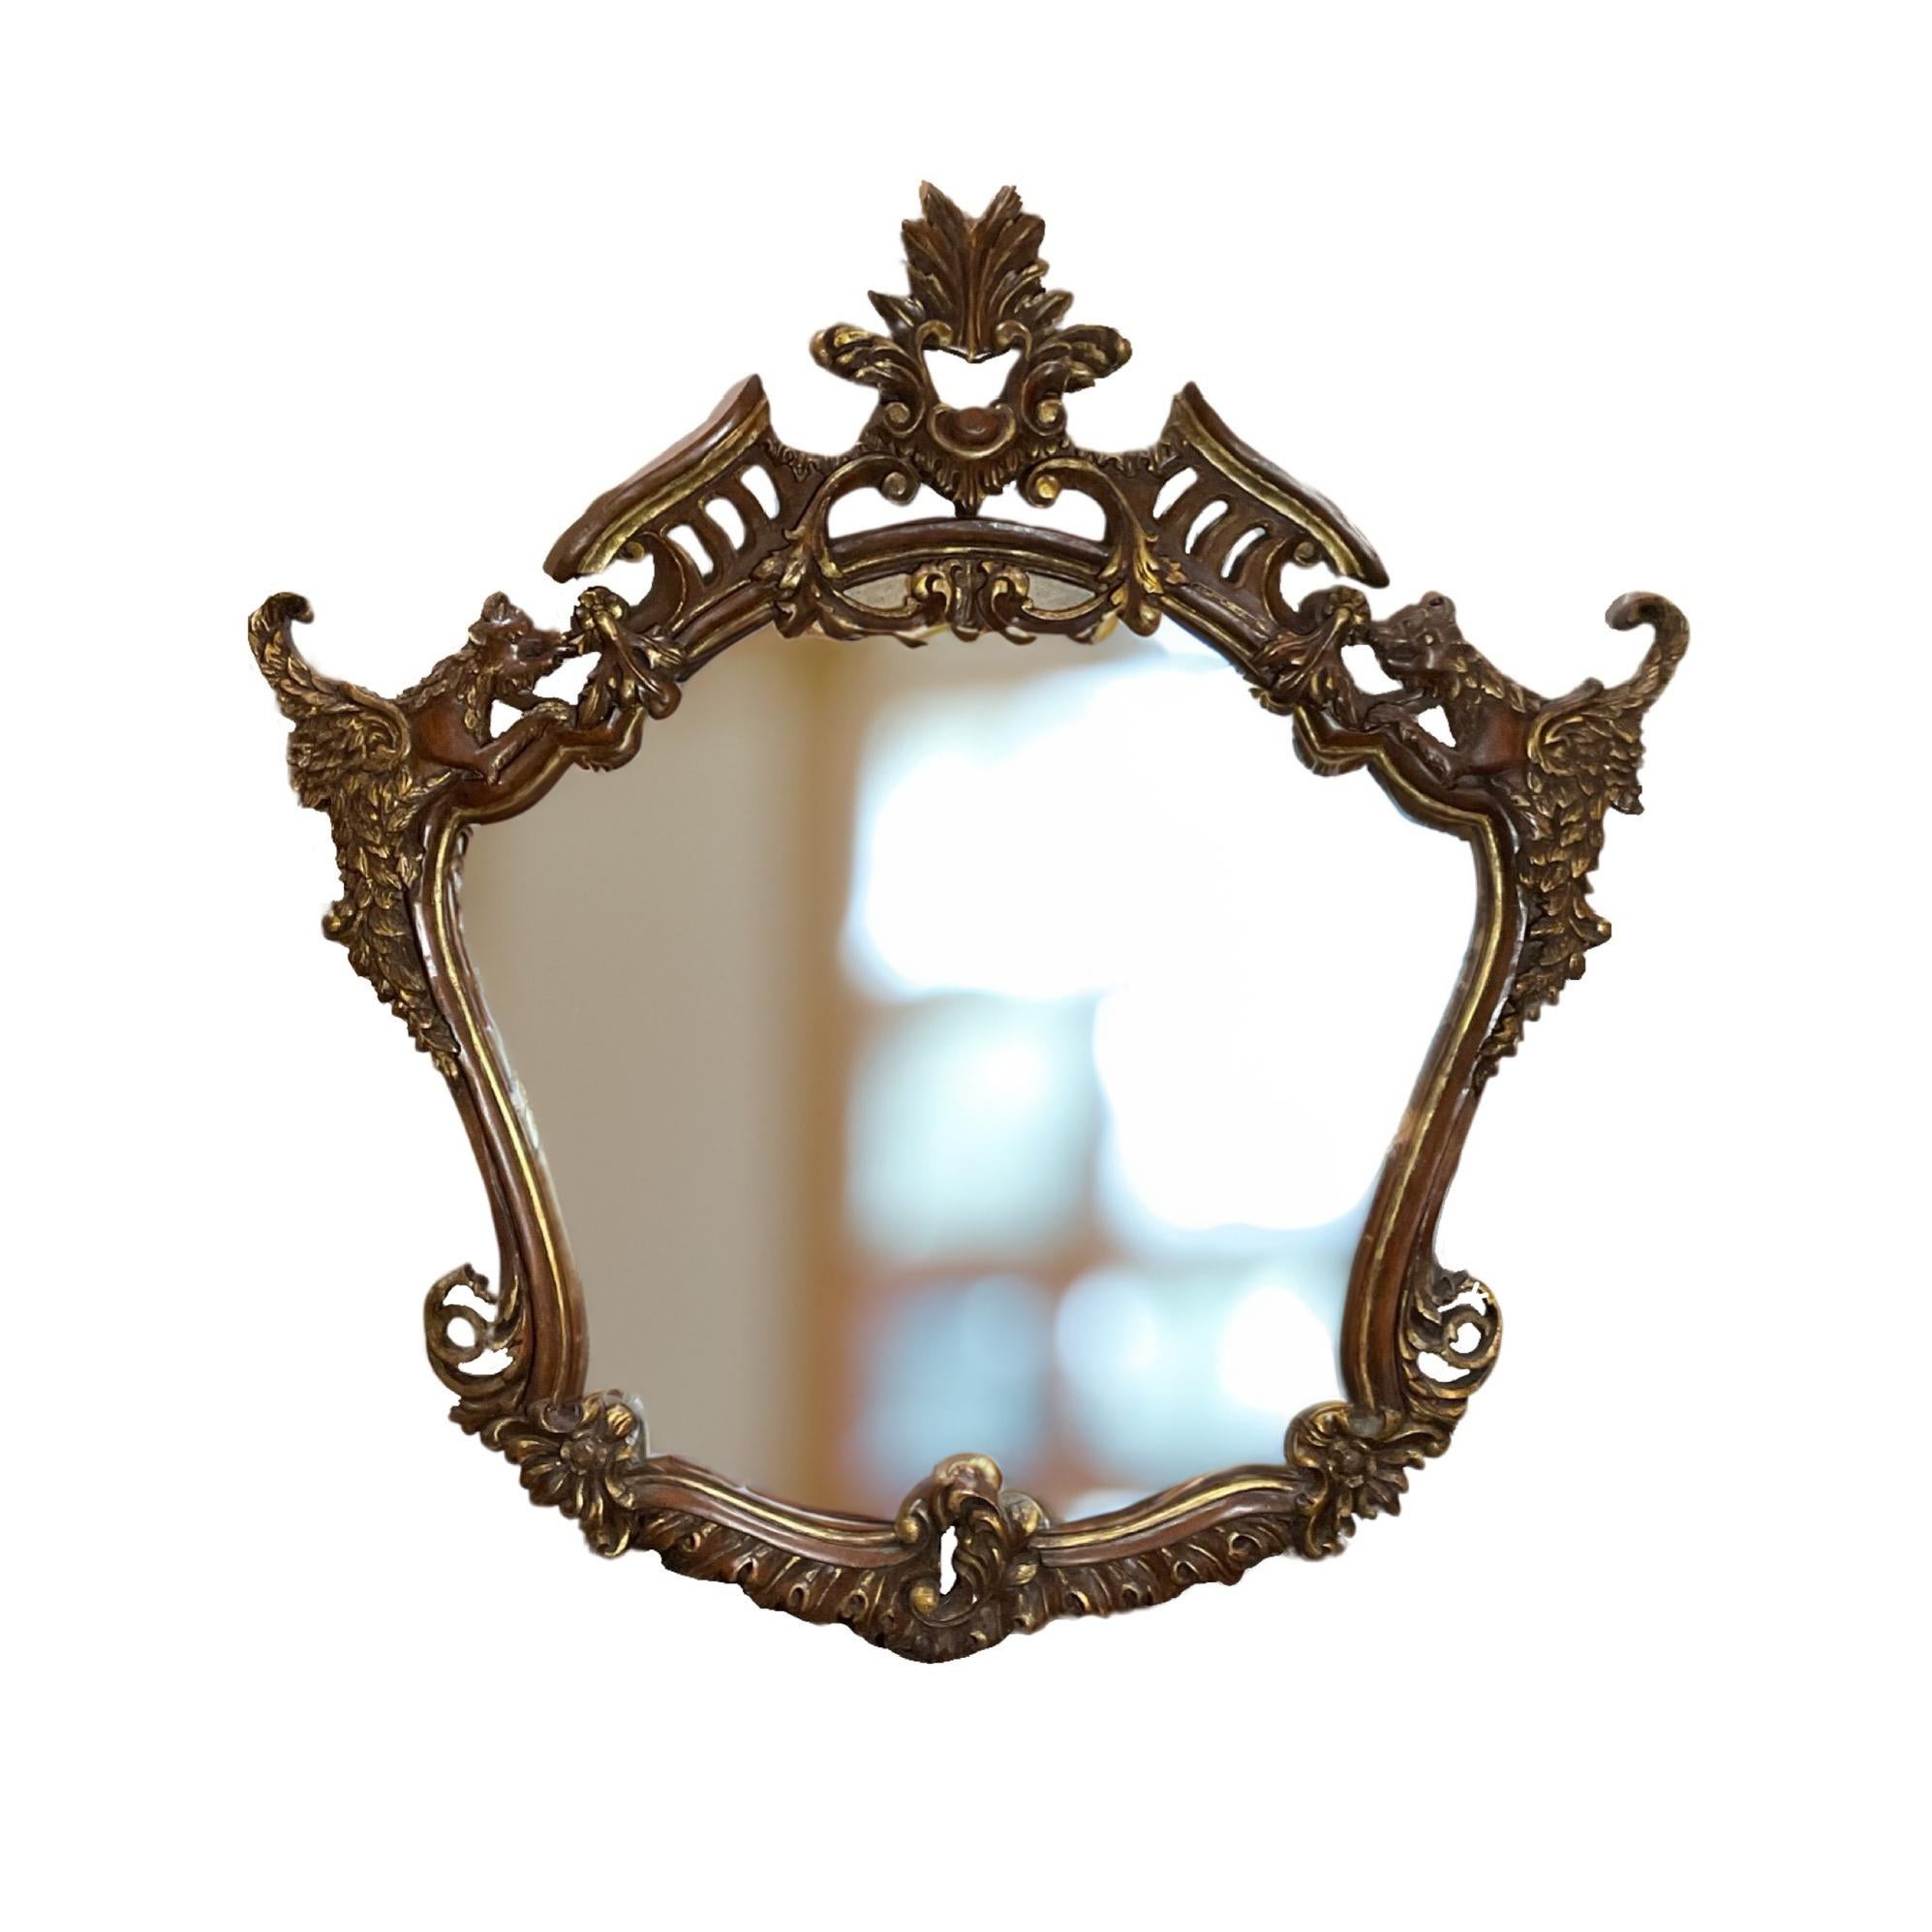 Expertly crafted in France during the iconic era of the 1960s, this wall mirror features a stunning carved oakwood frame. Its high-quality oakwood material exudes a timeless, elegant aesthetic, making it a focal point in any room. Add depth and